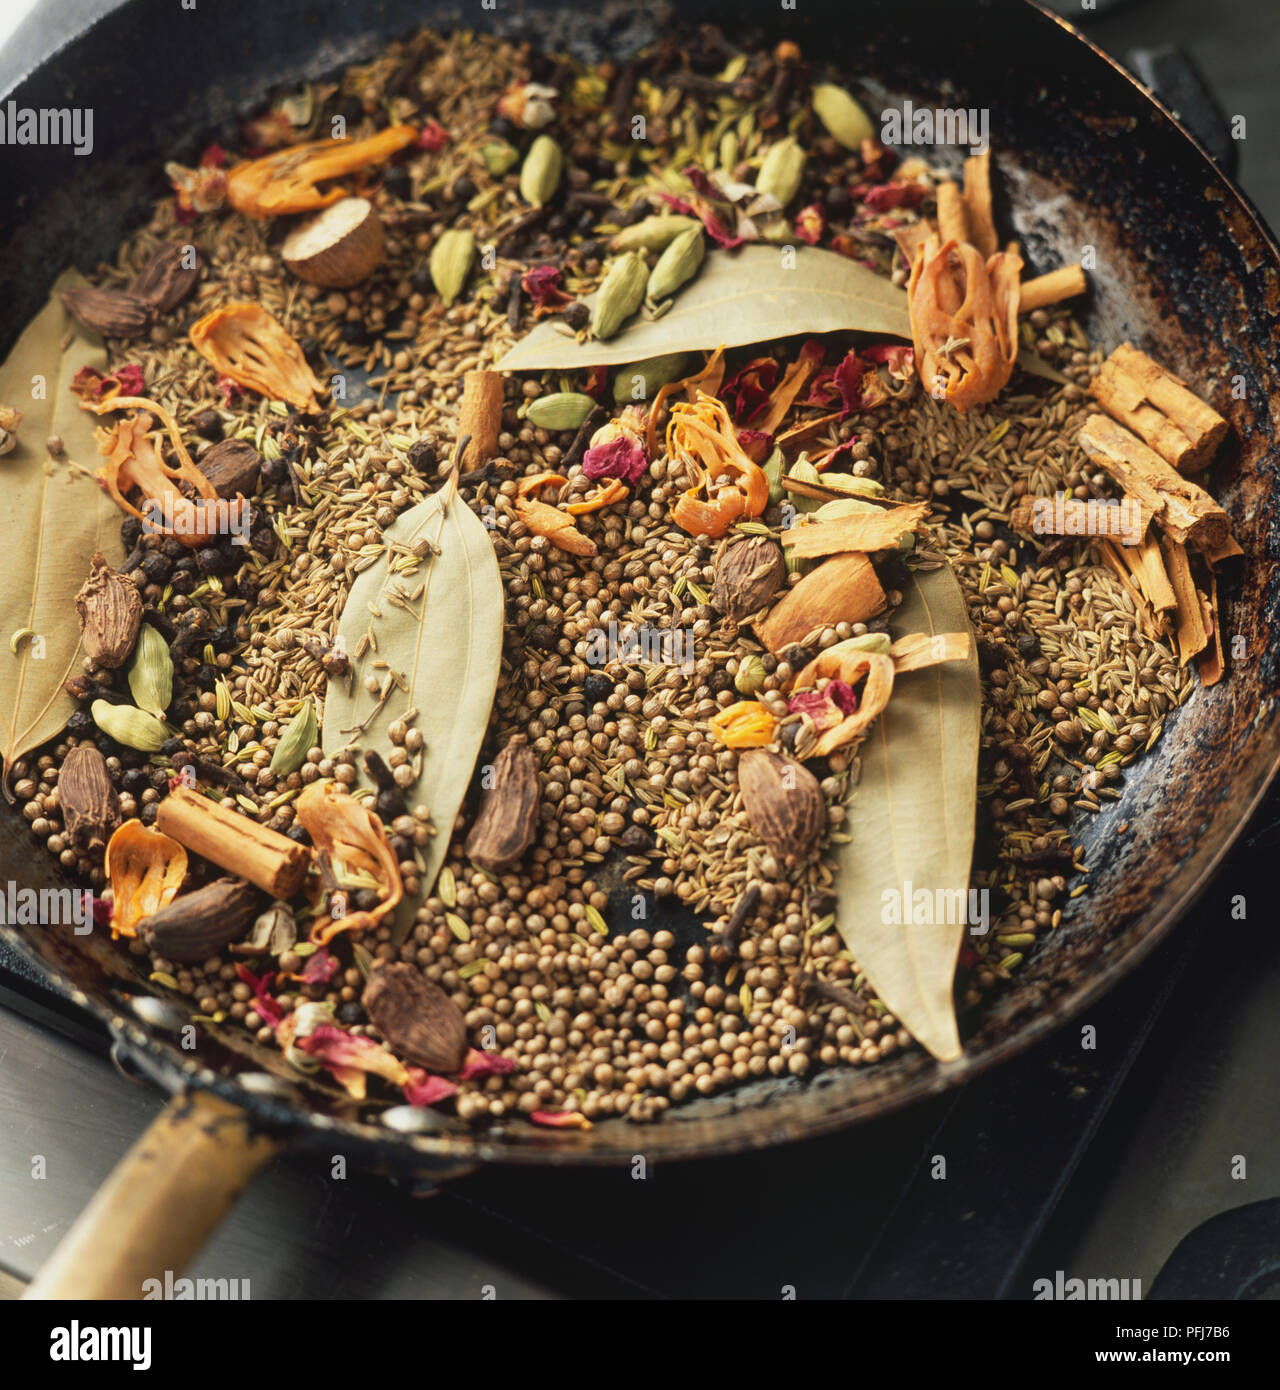 Spice mixture in large pan, leaves, seeds, pods, sticks, overhead view. Stock Photo